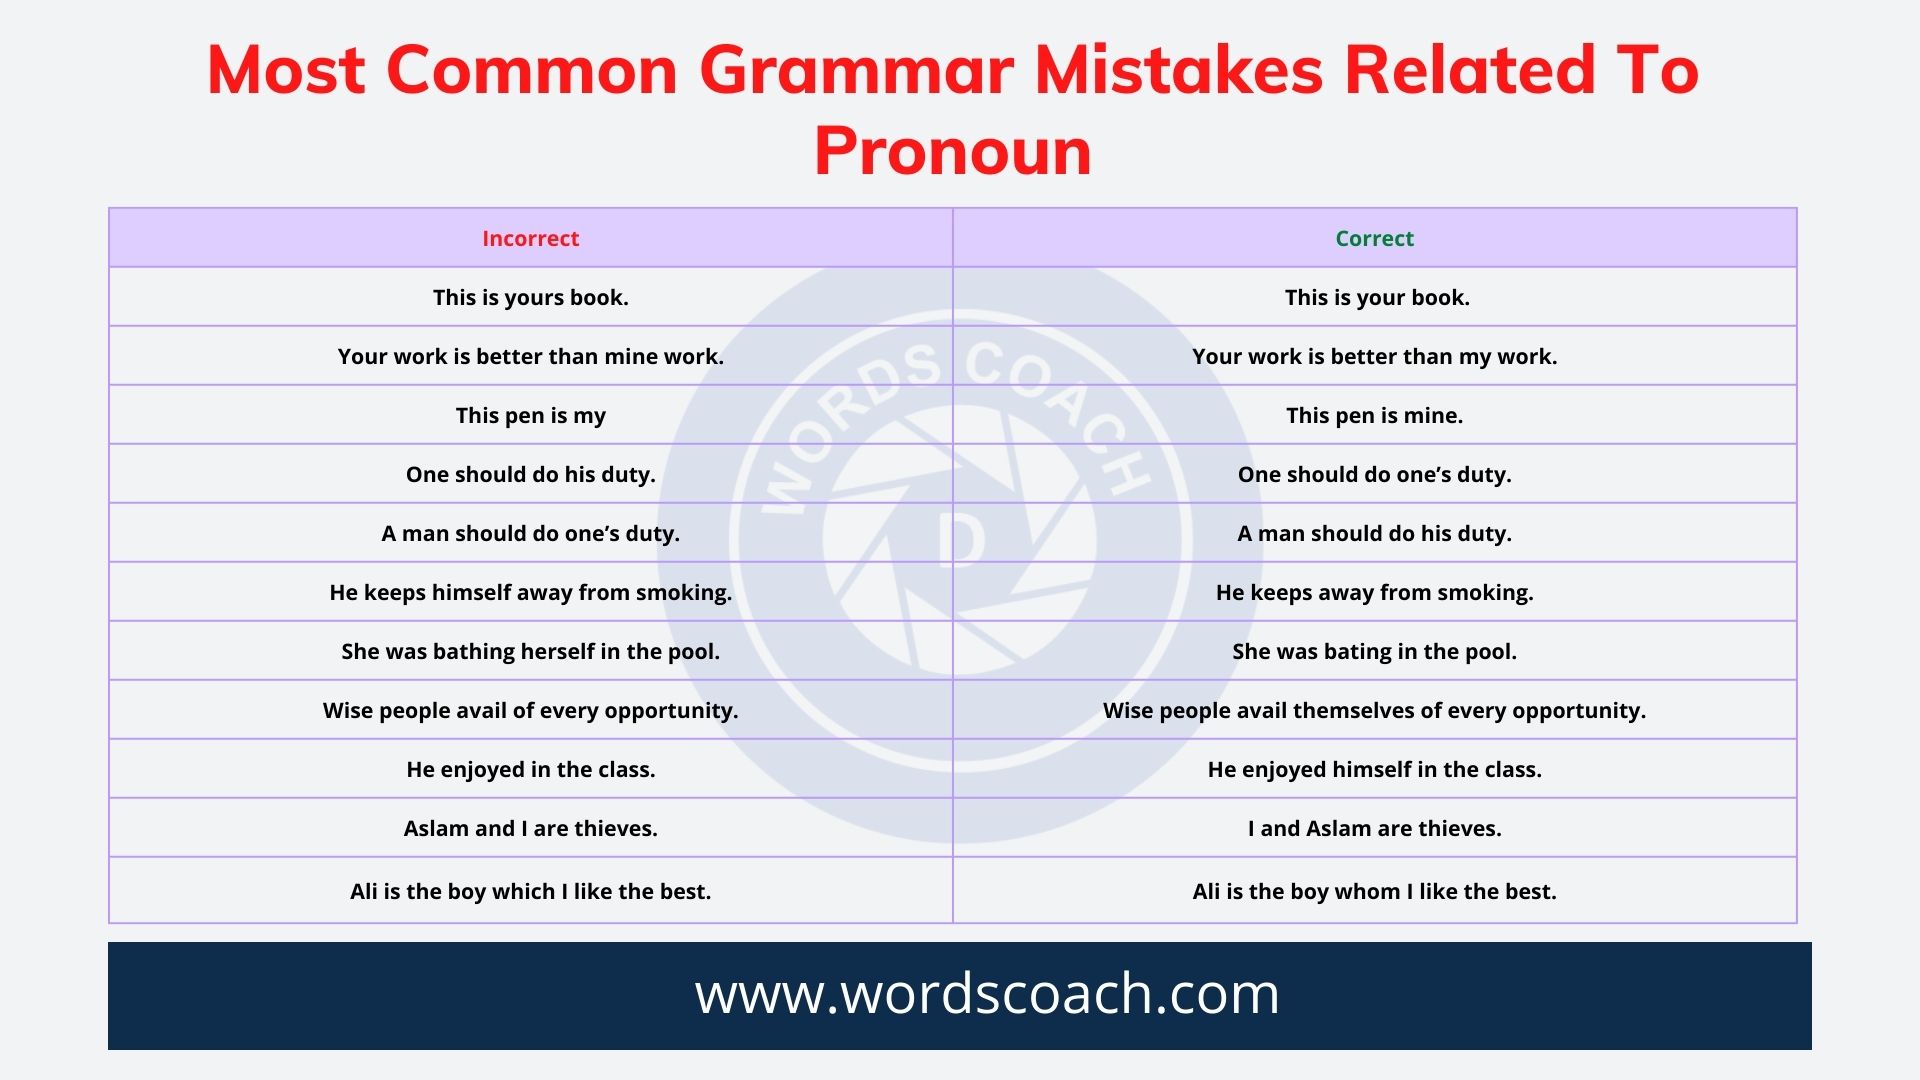 Most Common Grammar Mistakes Related To Pronoun